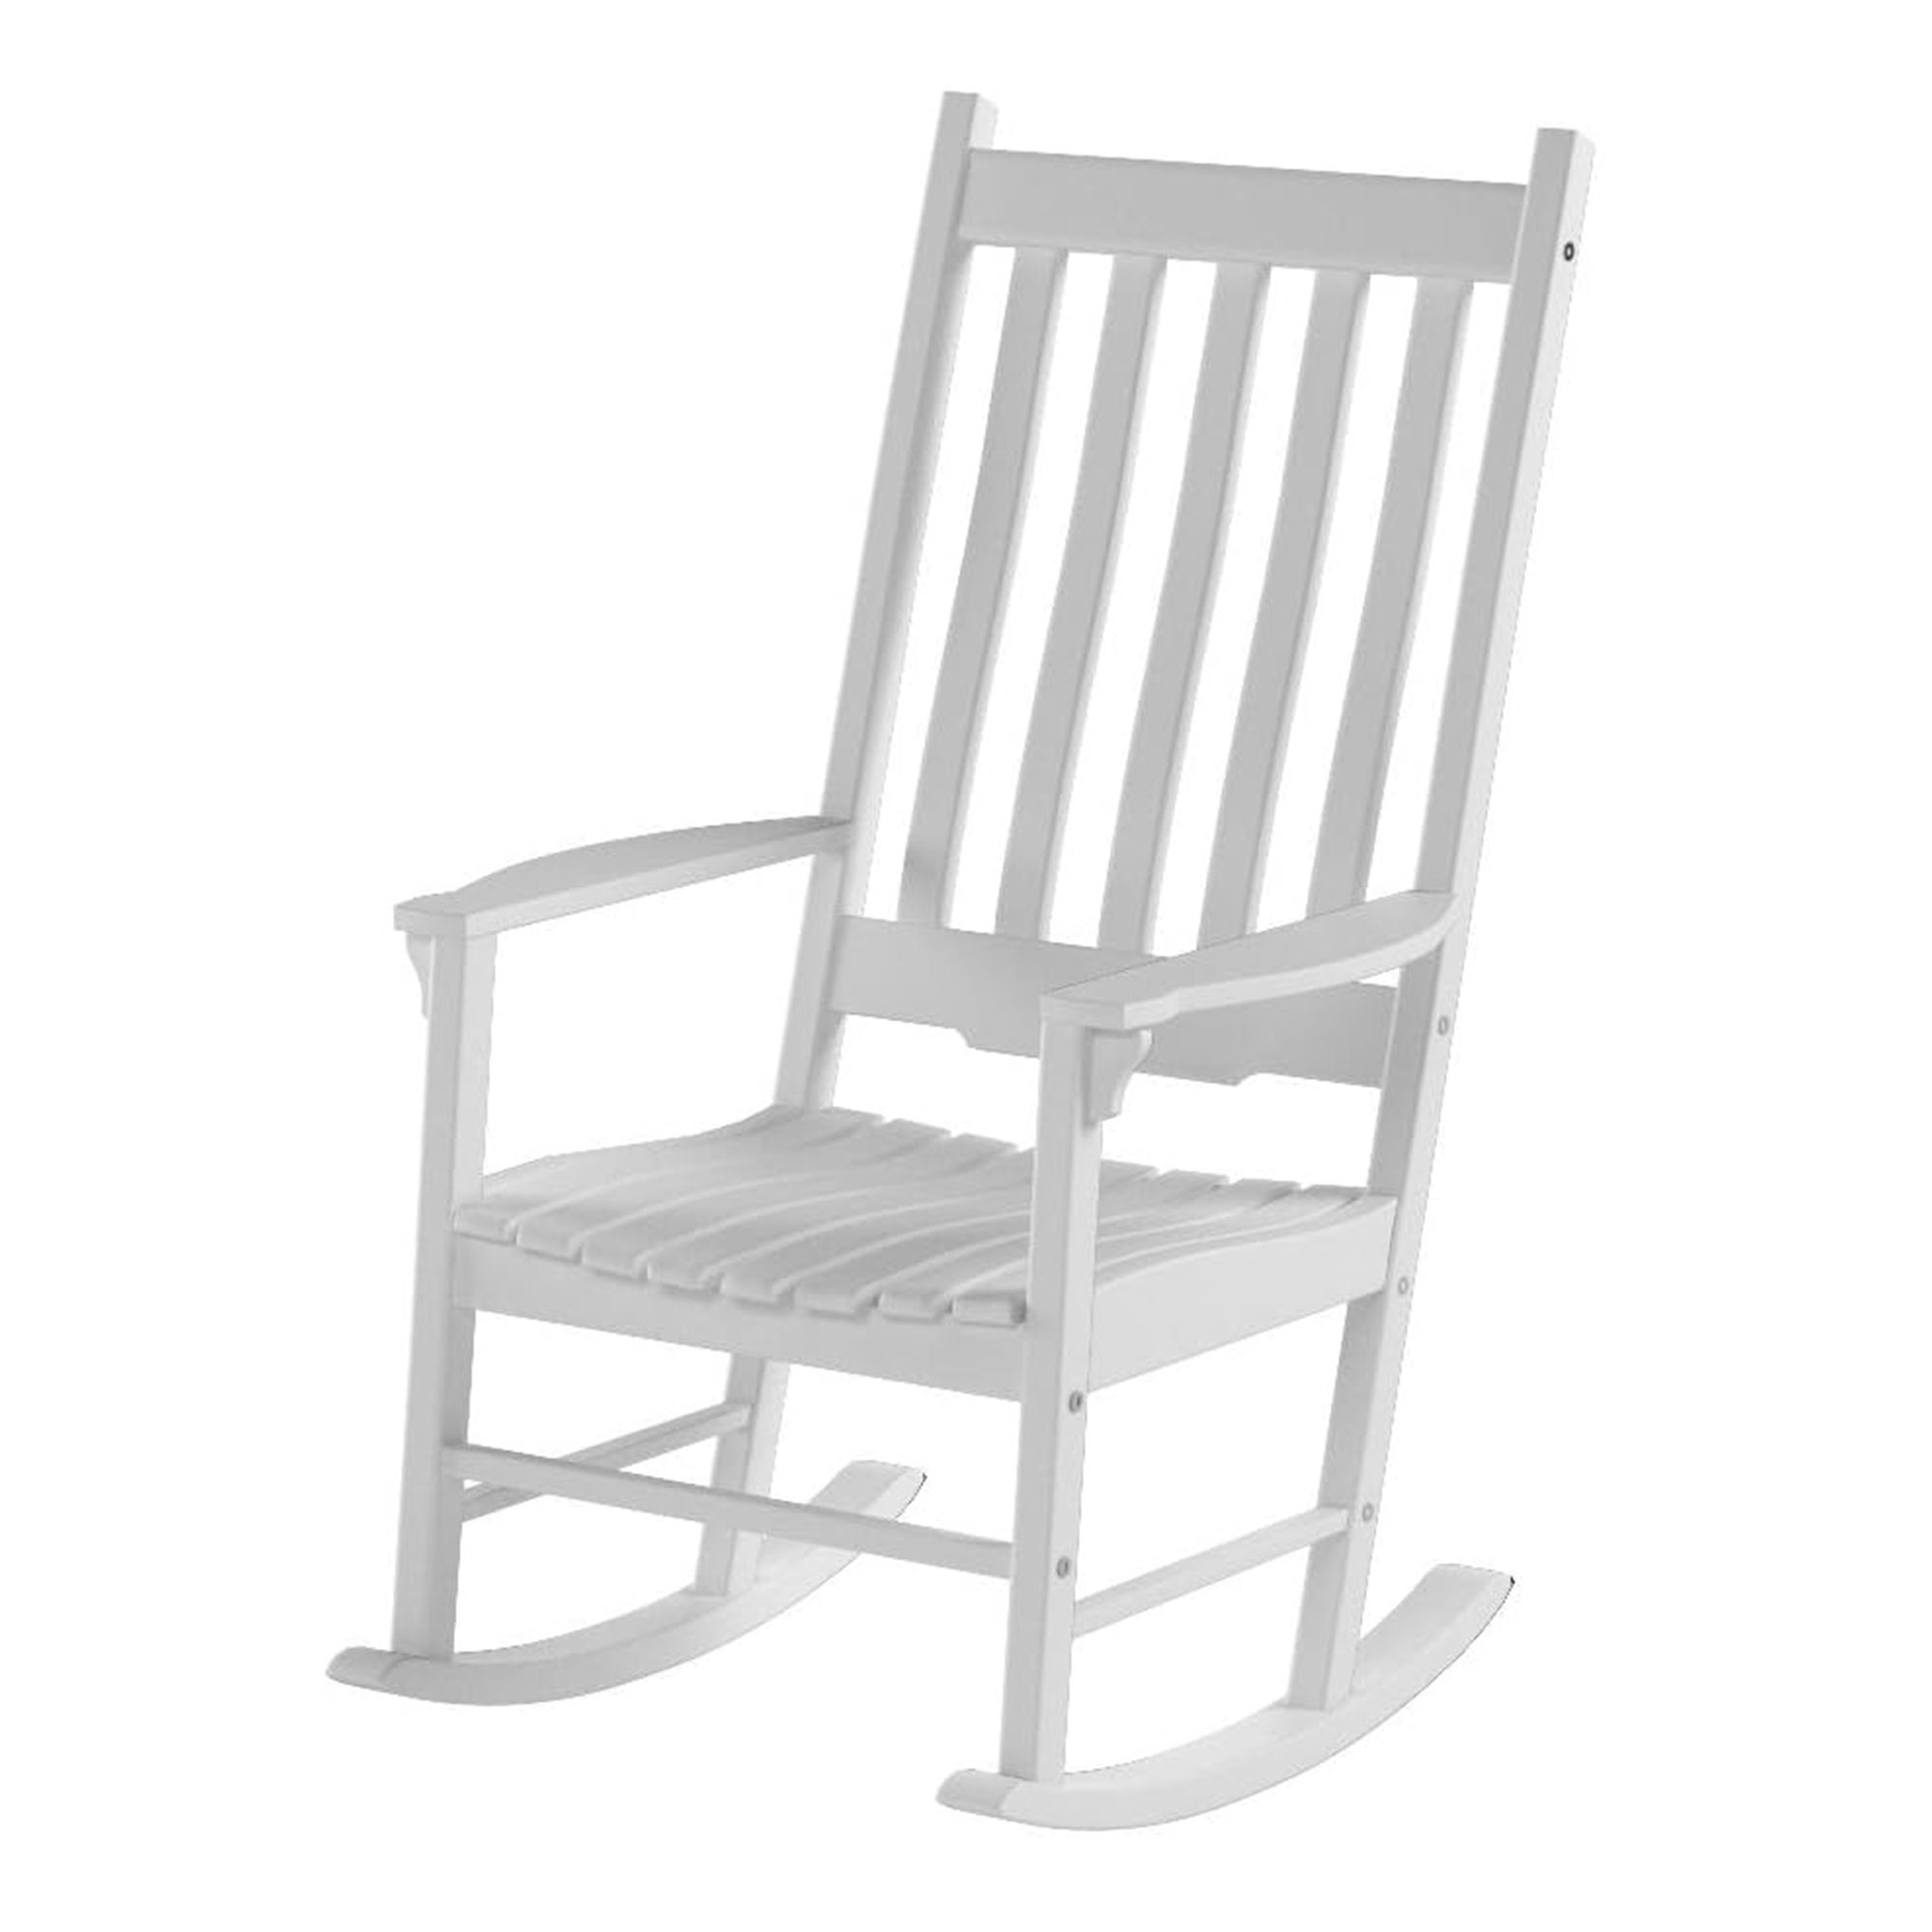 Northbeam Solid Acacia Hardwood Outdoor Patio Slatted Back Rocking Chair, White - image 1 of 11